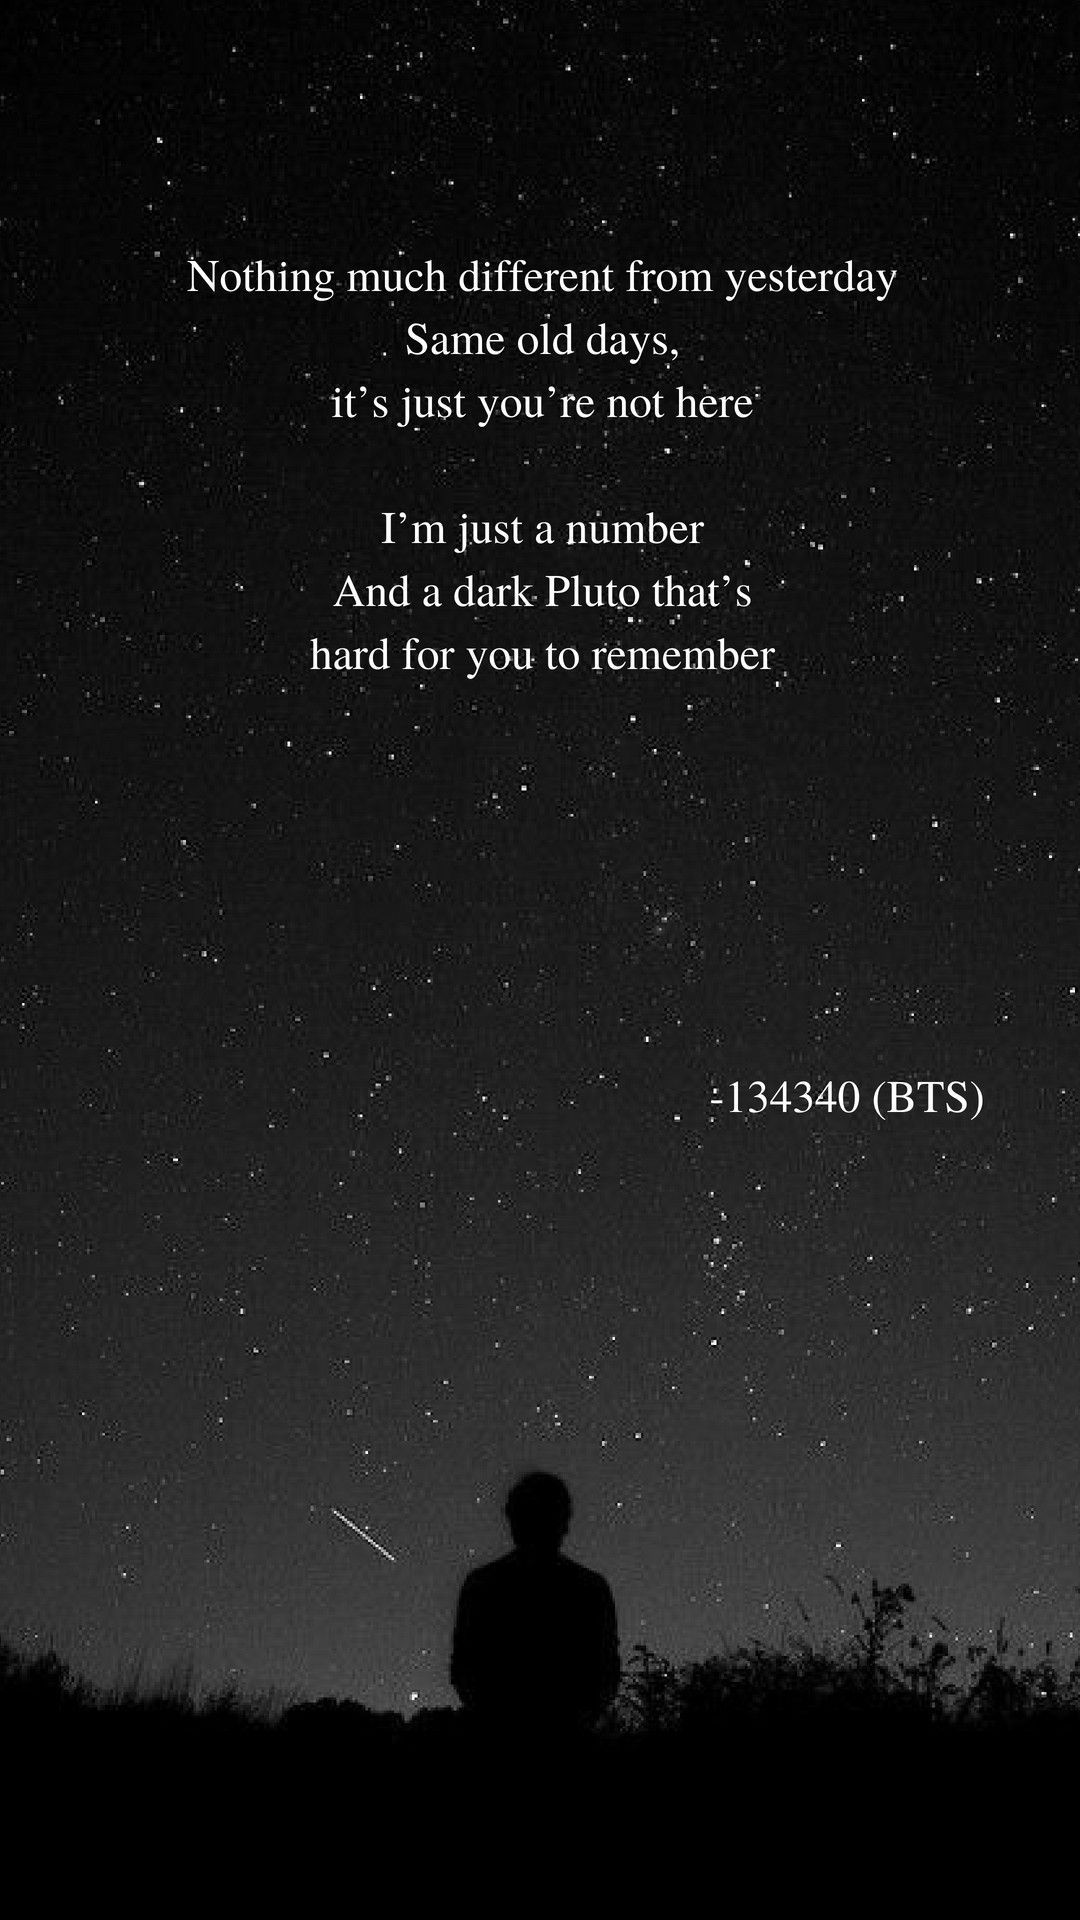 BTS Lyric Quotes Wallpapers on